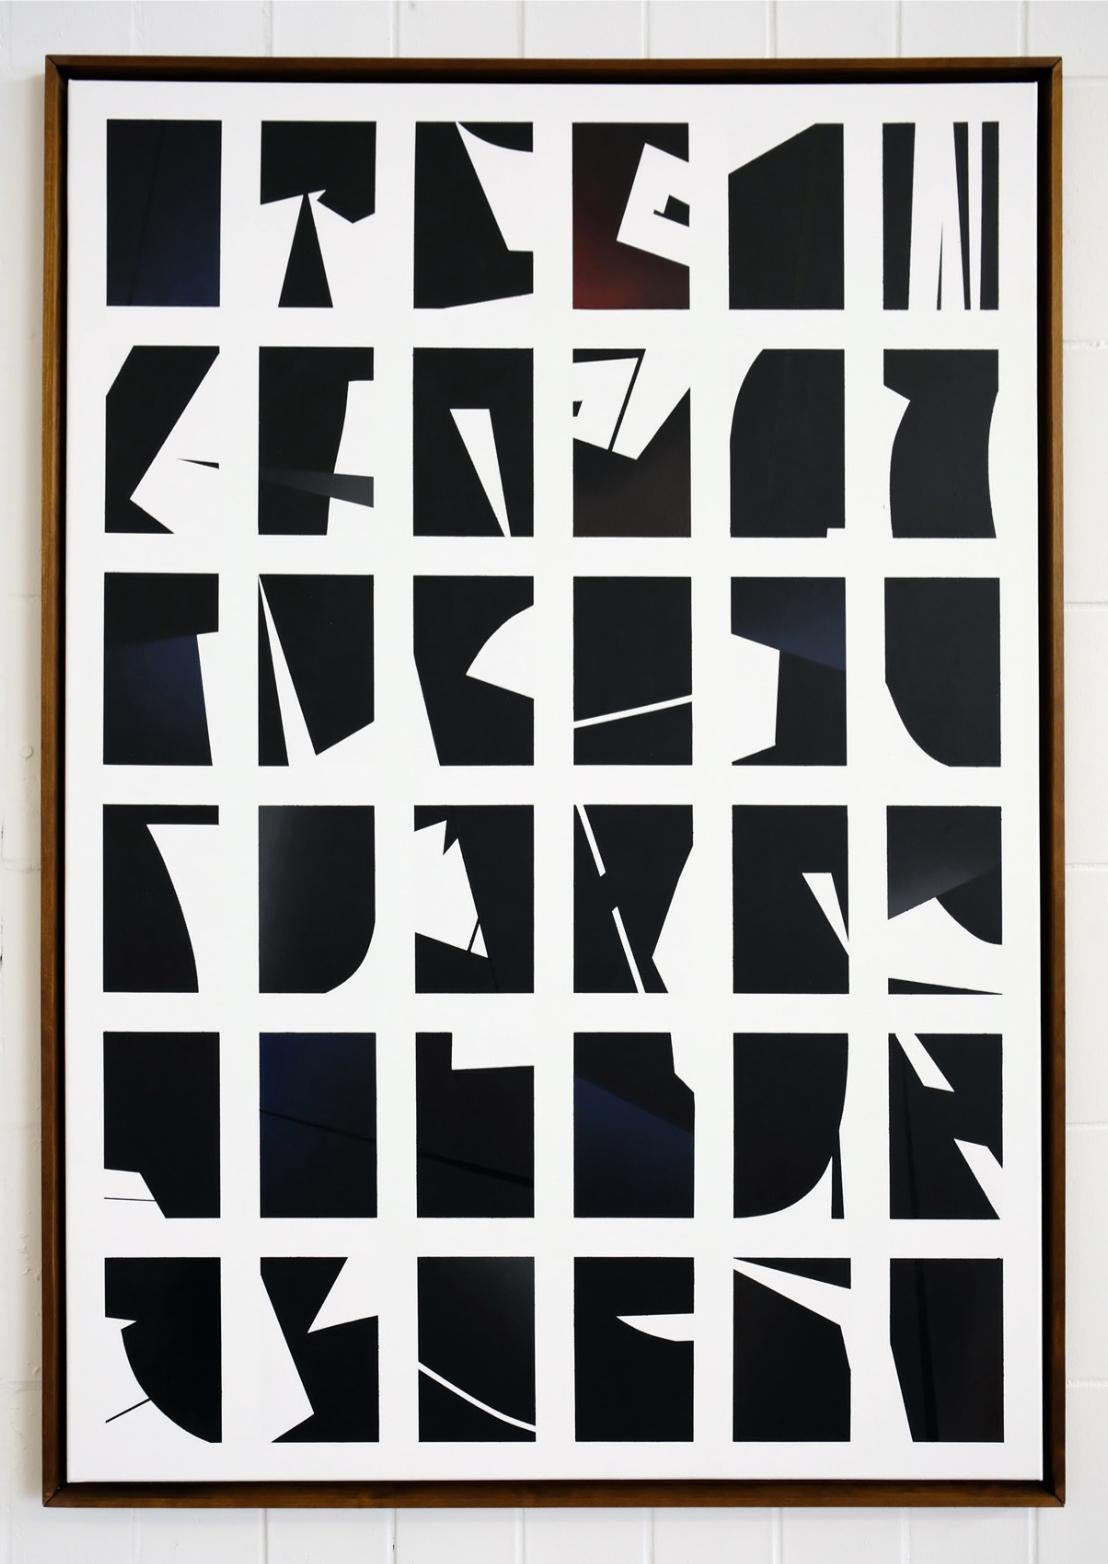 Artist: Kera

Geometric abstraction in white, black and blue

Medium: Acrylics and spraypaint on canvas, framed in thin wood frame.

Size: 130 x 90 cm

Original